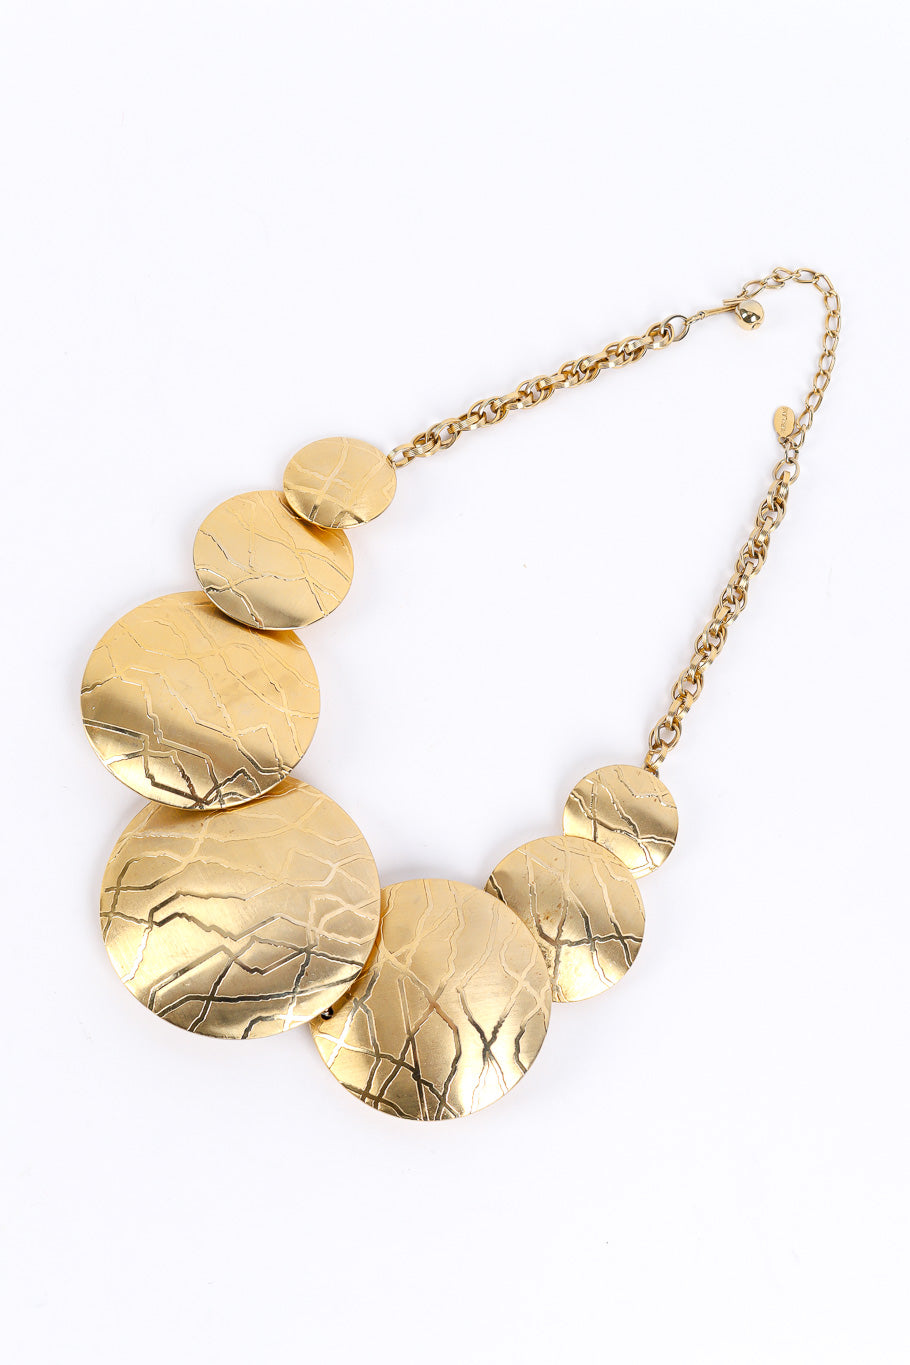 Disc necklace by Parklane flat lay clasped @recessla